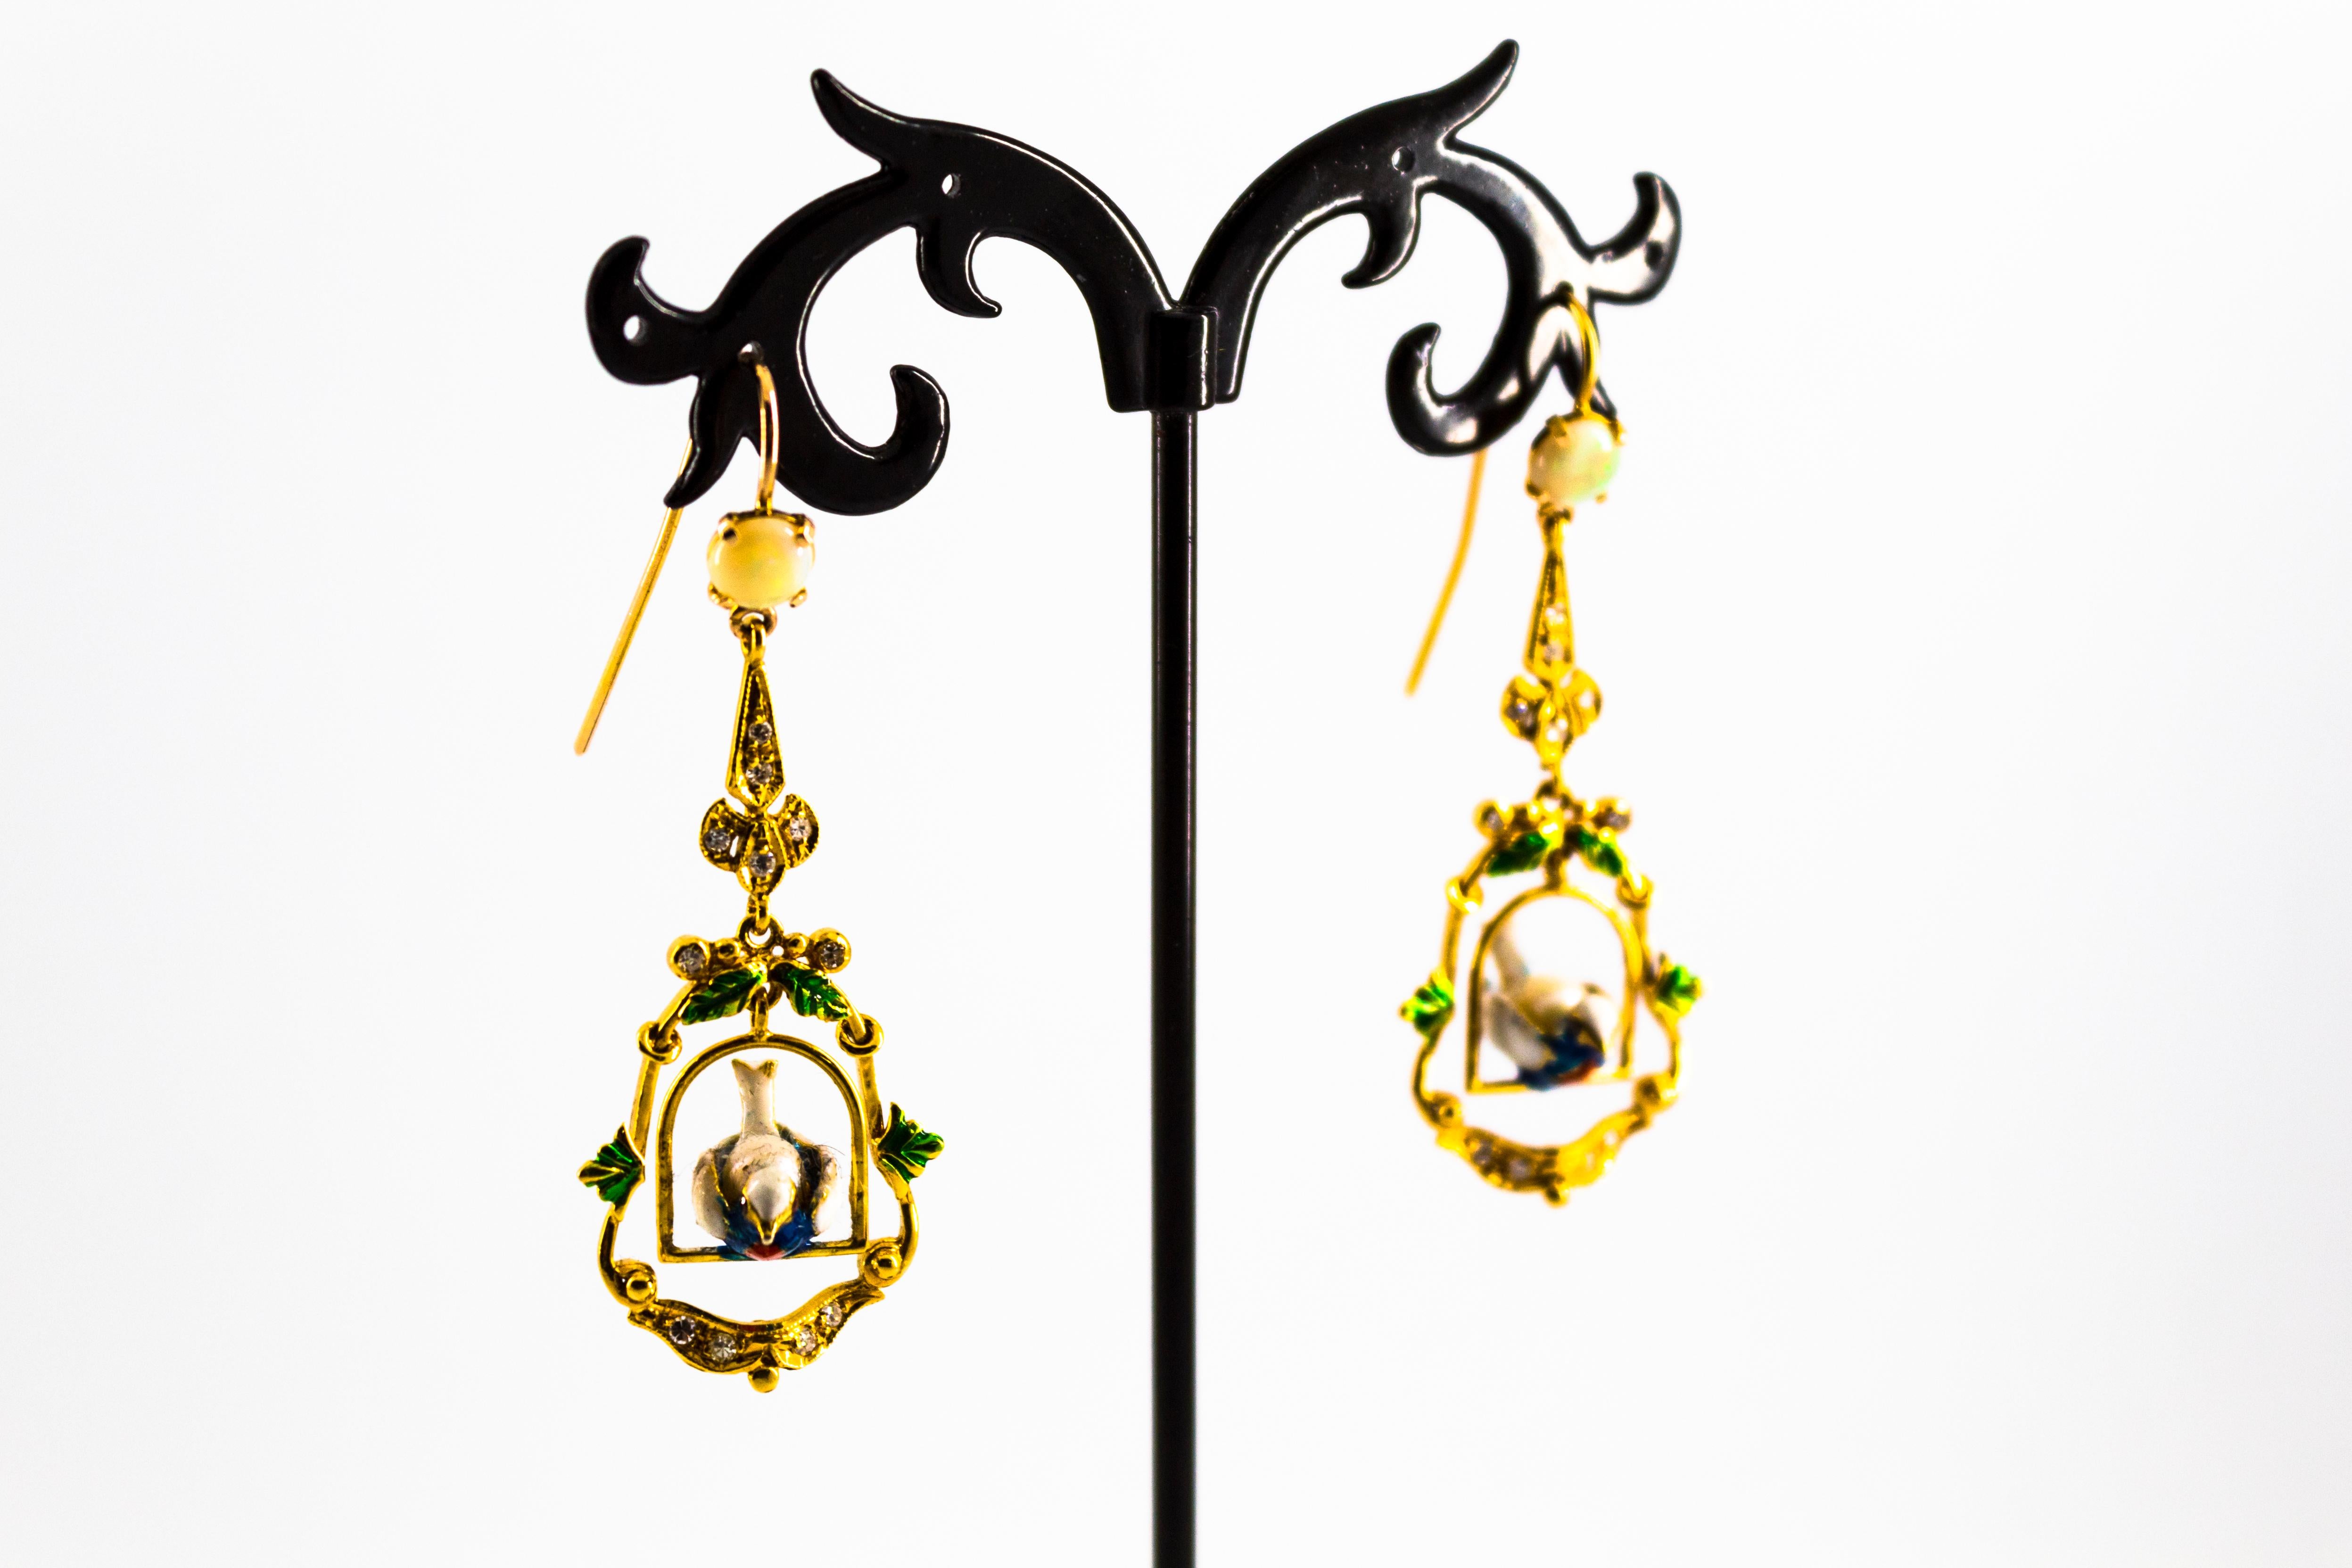 These Stud Drop Earrings are made of 14K Yellow Gold.
These Earrings have 0.60 Carats of White Diamonds.
These Earrings have 1.30 Carats of Opals.
These Earrings have also Enamel and two Pearls on the Birds.

All our Earrings have pins for pierced